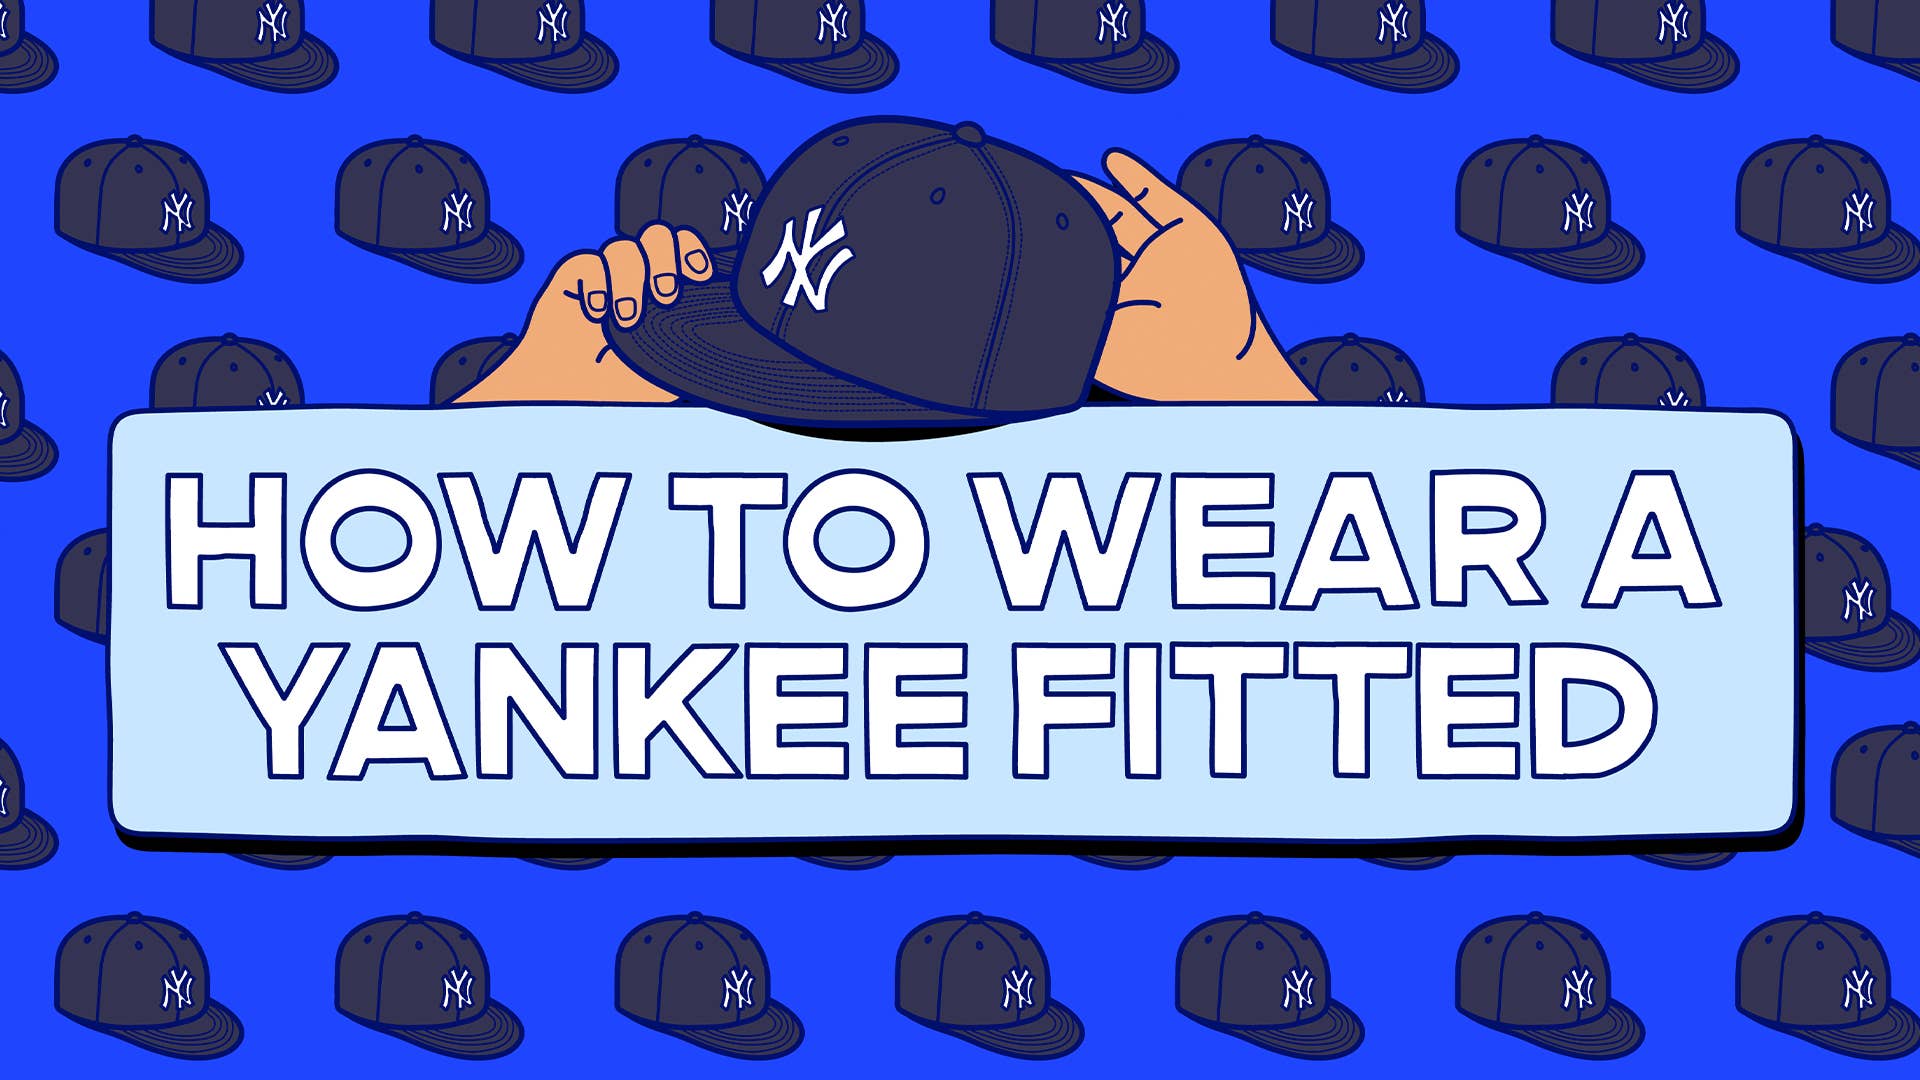 How to Wear A NY Yankee Fitted